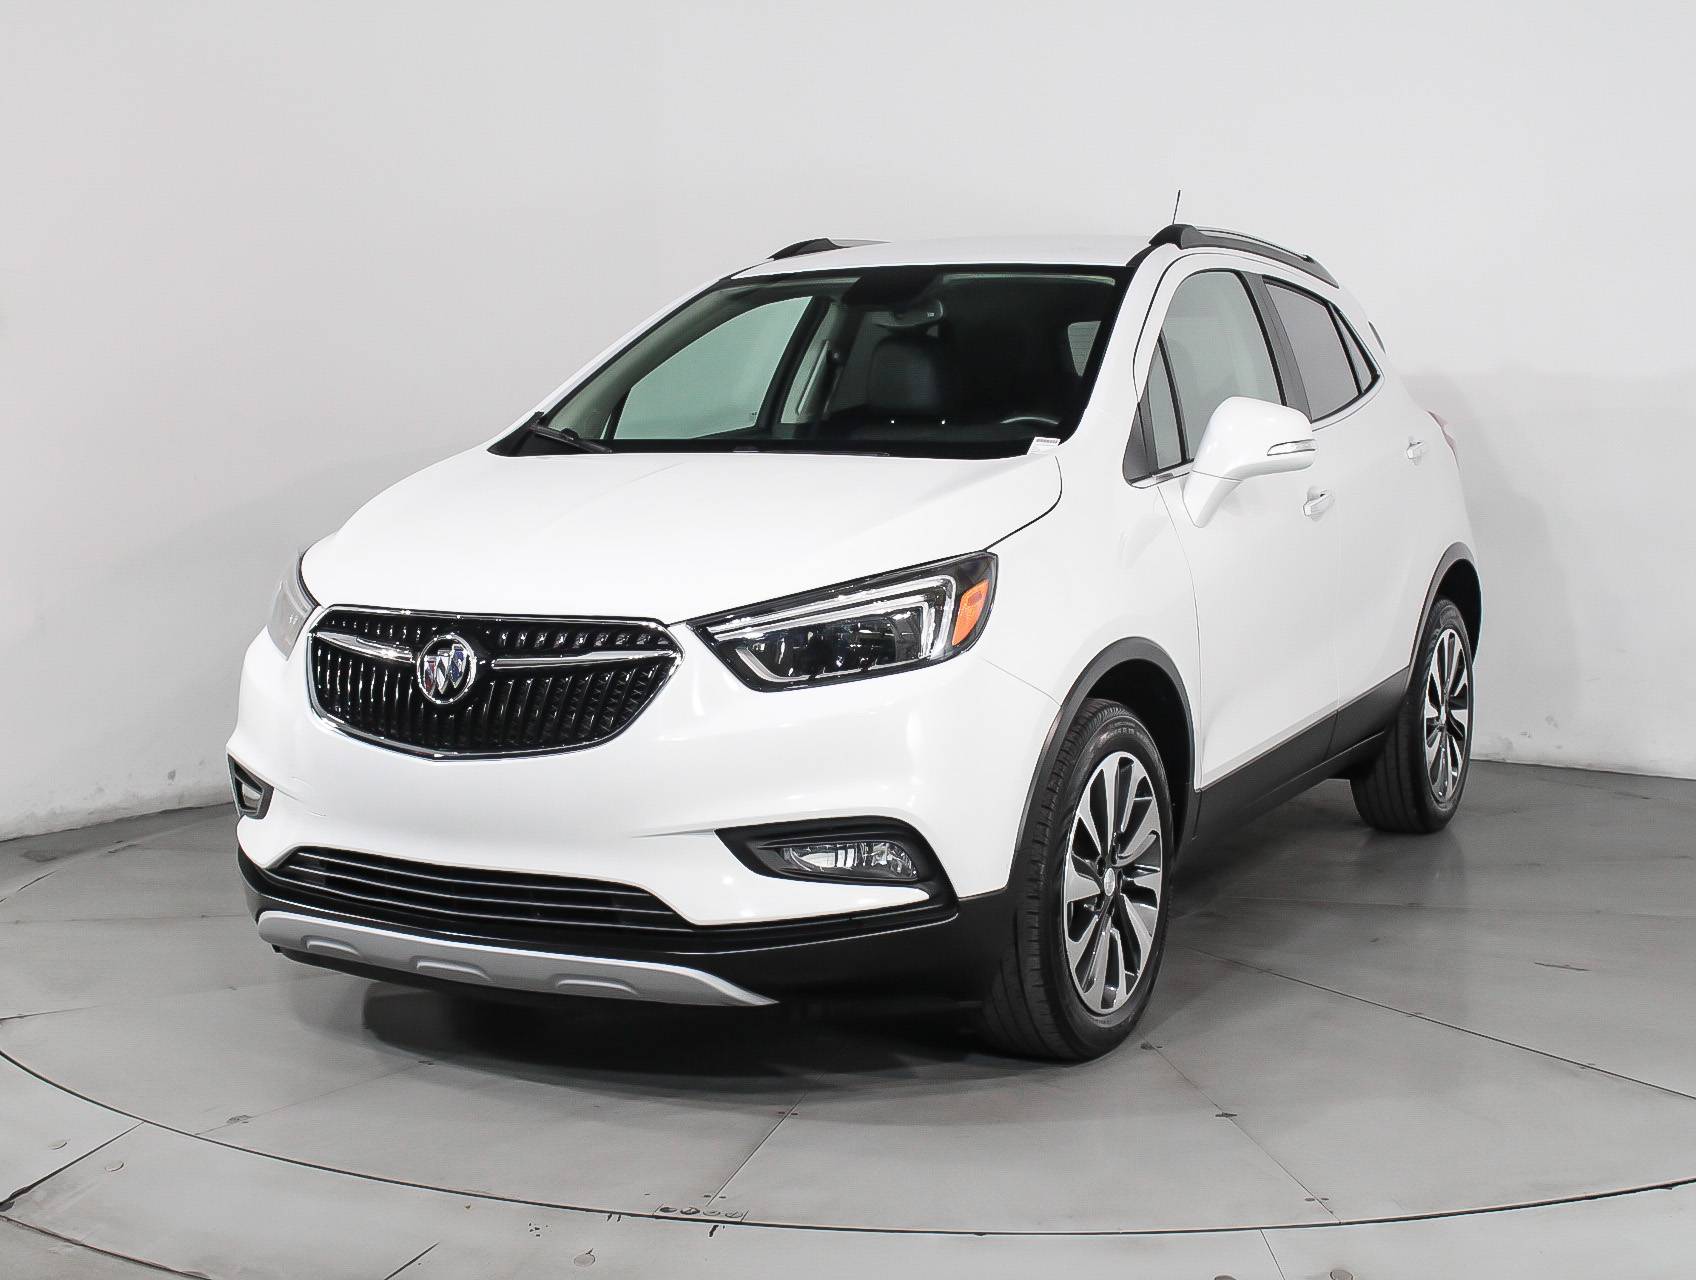 Used 2017 BUICK ENCORE ESSENCE for sale in MIAMI | 99014